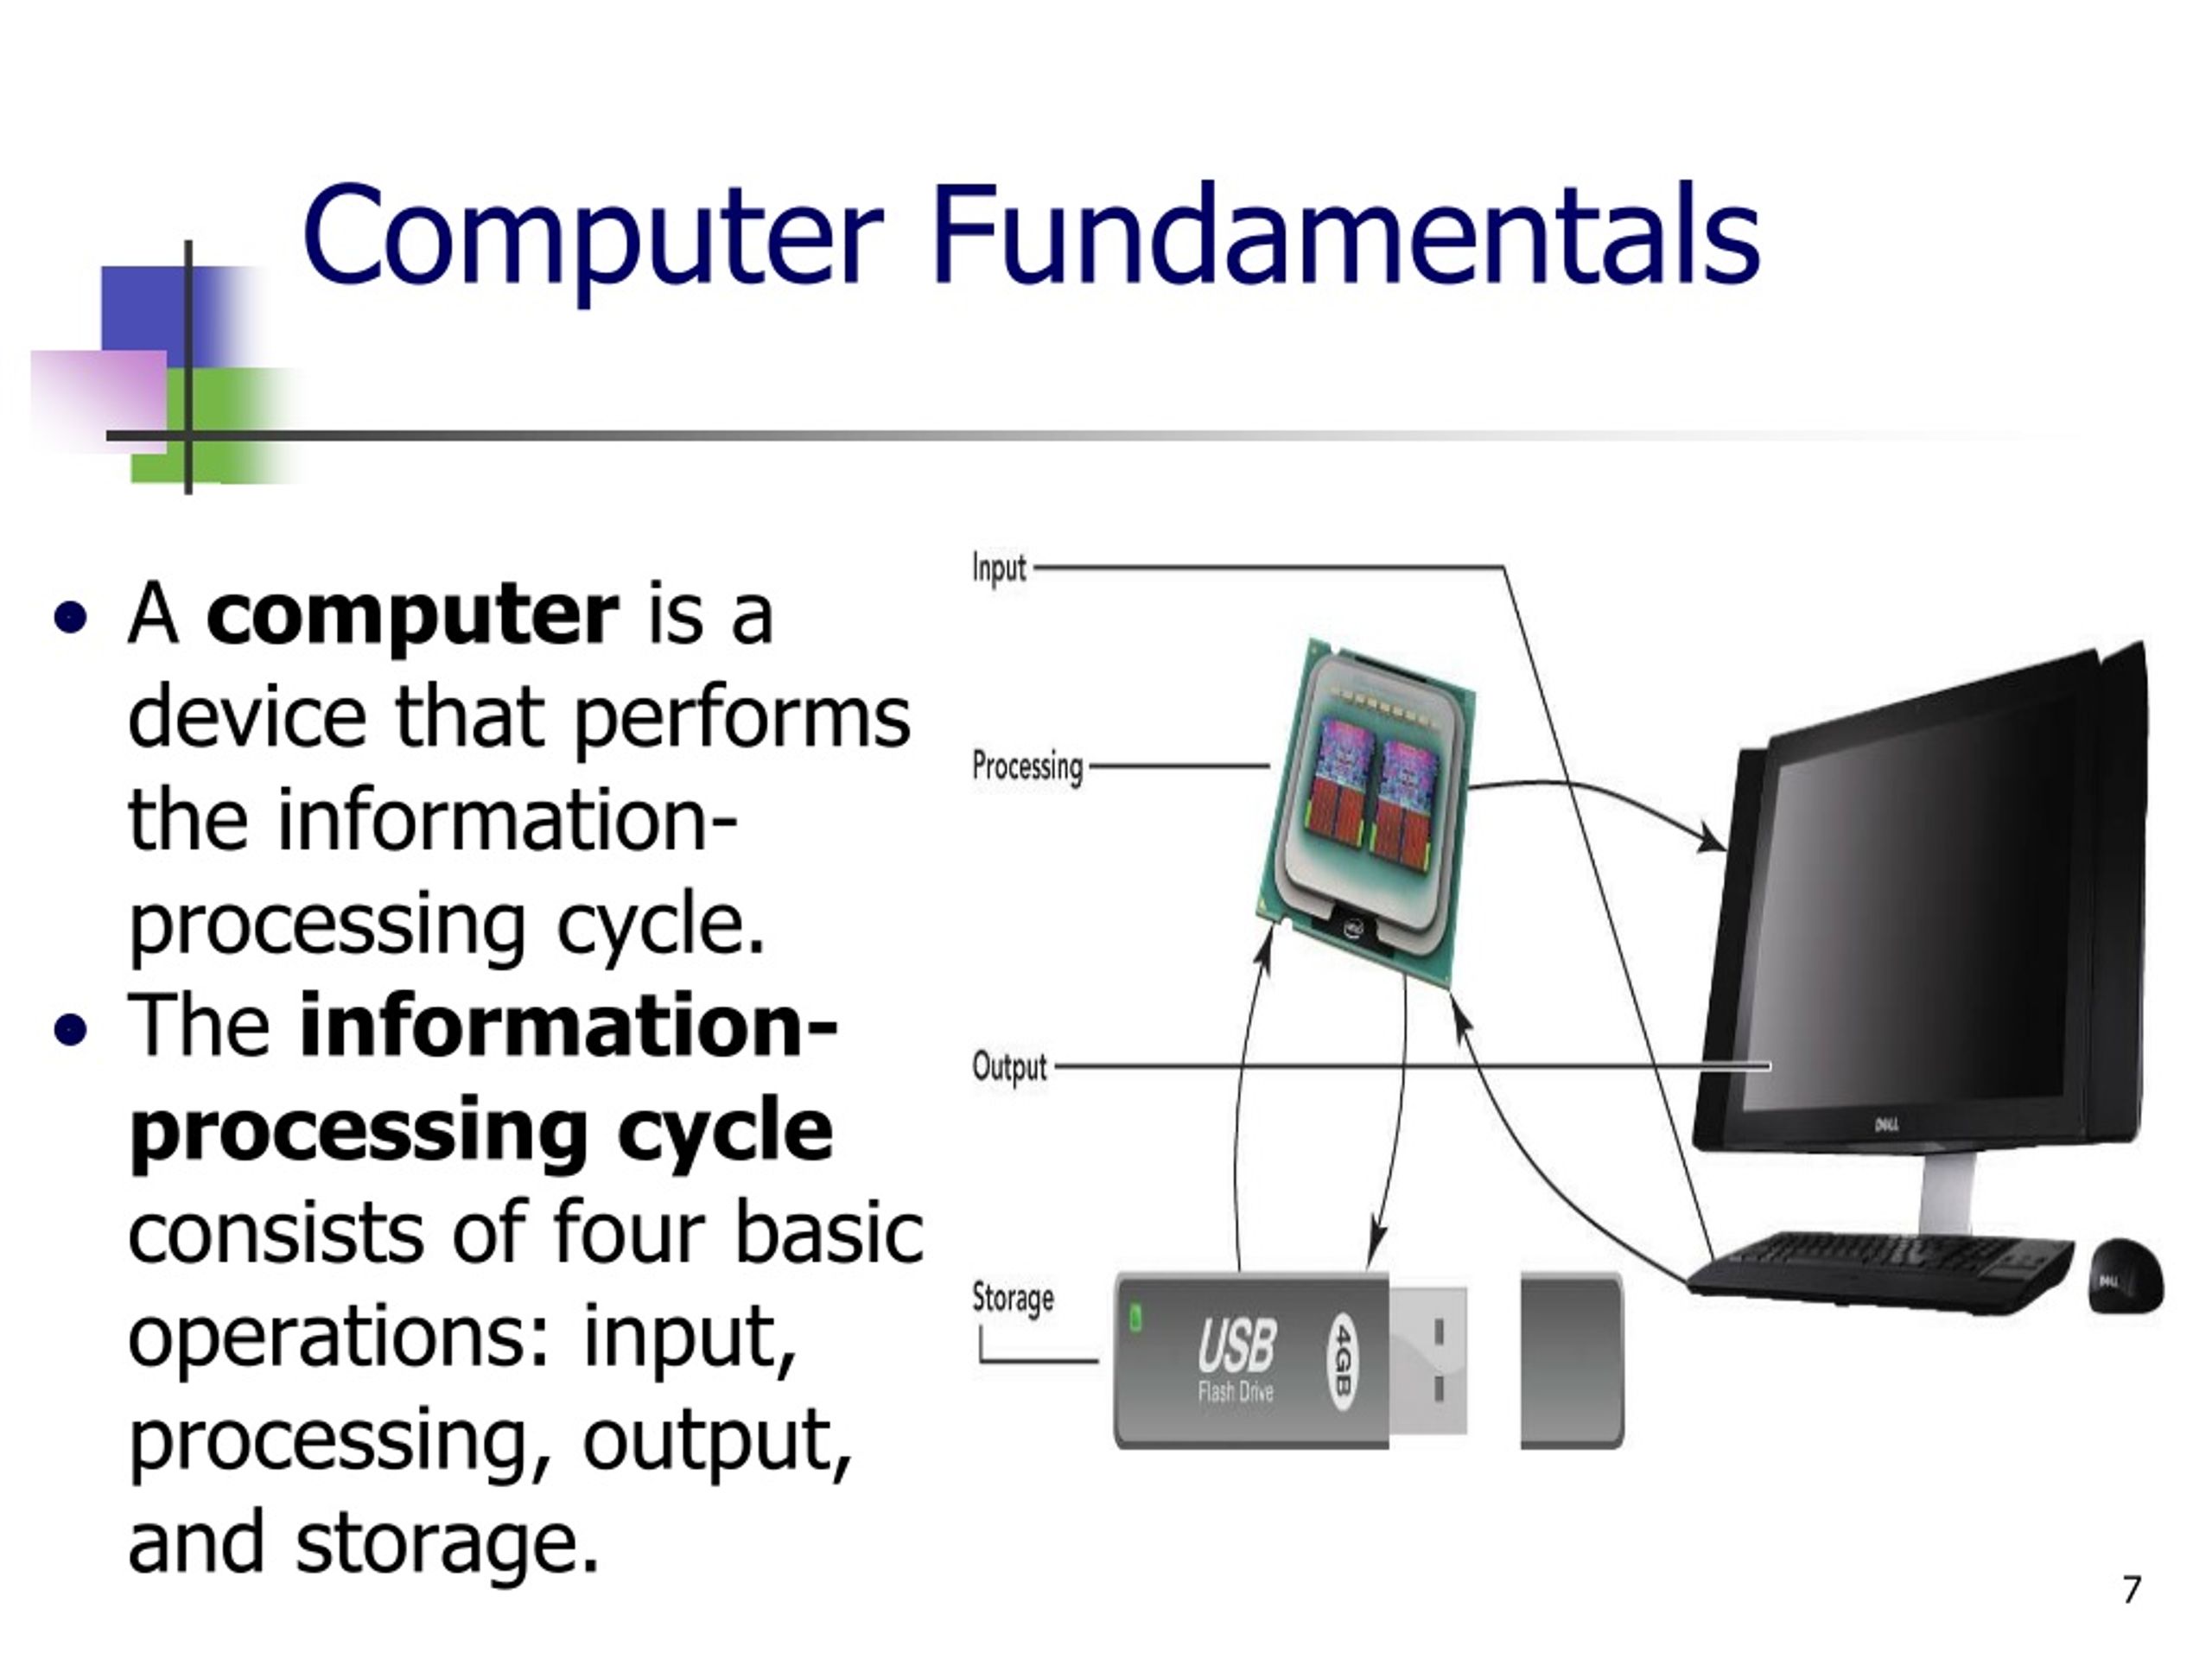 introduction to presentation in computing